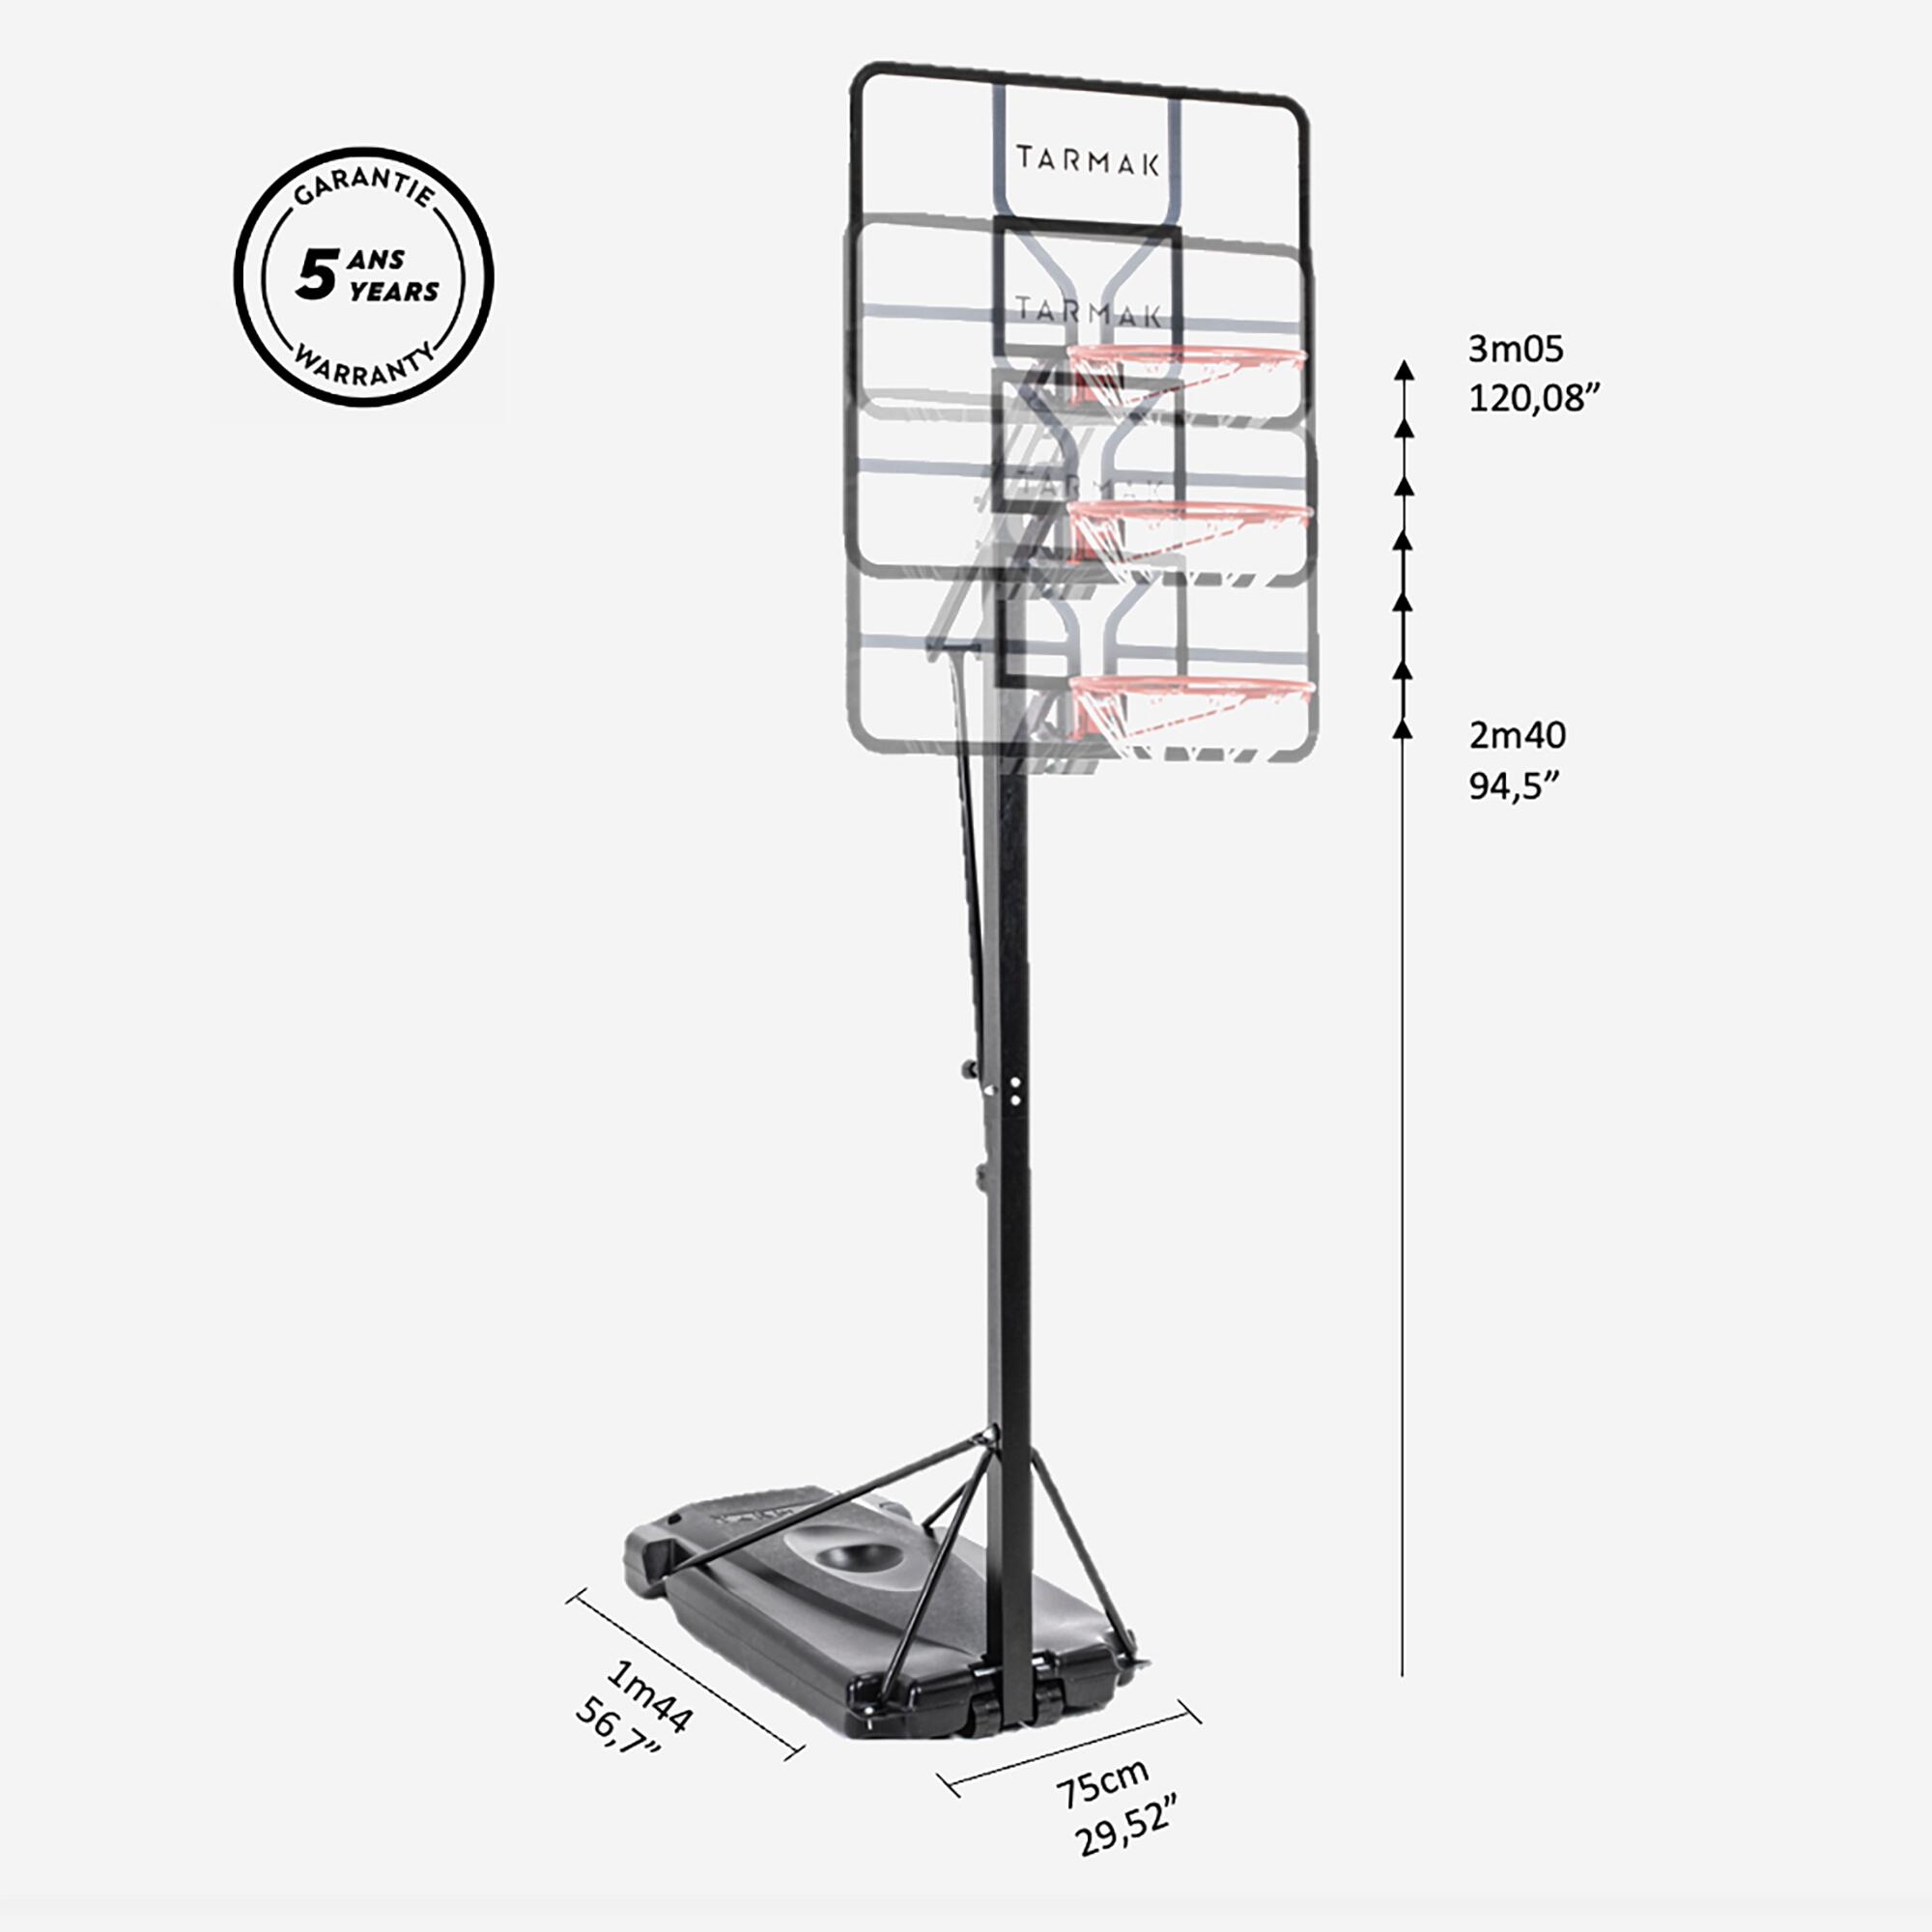 Basketball Hoop with Easy-Adjustment Stand (2.40m to 3.05m) B700 Pro 2/7